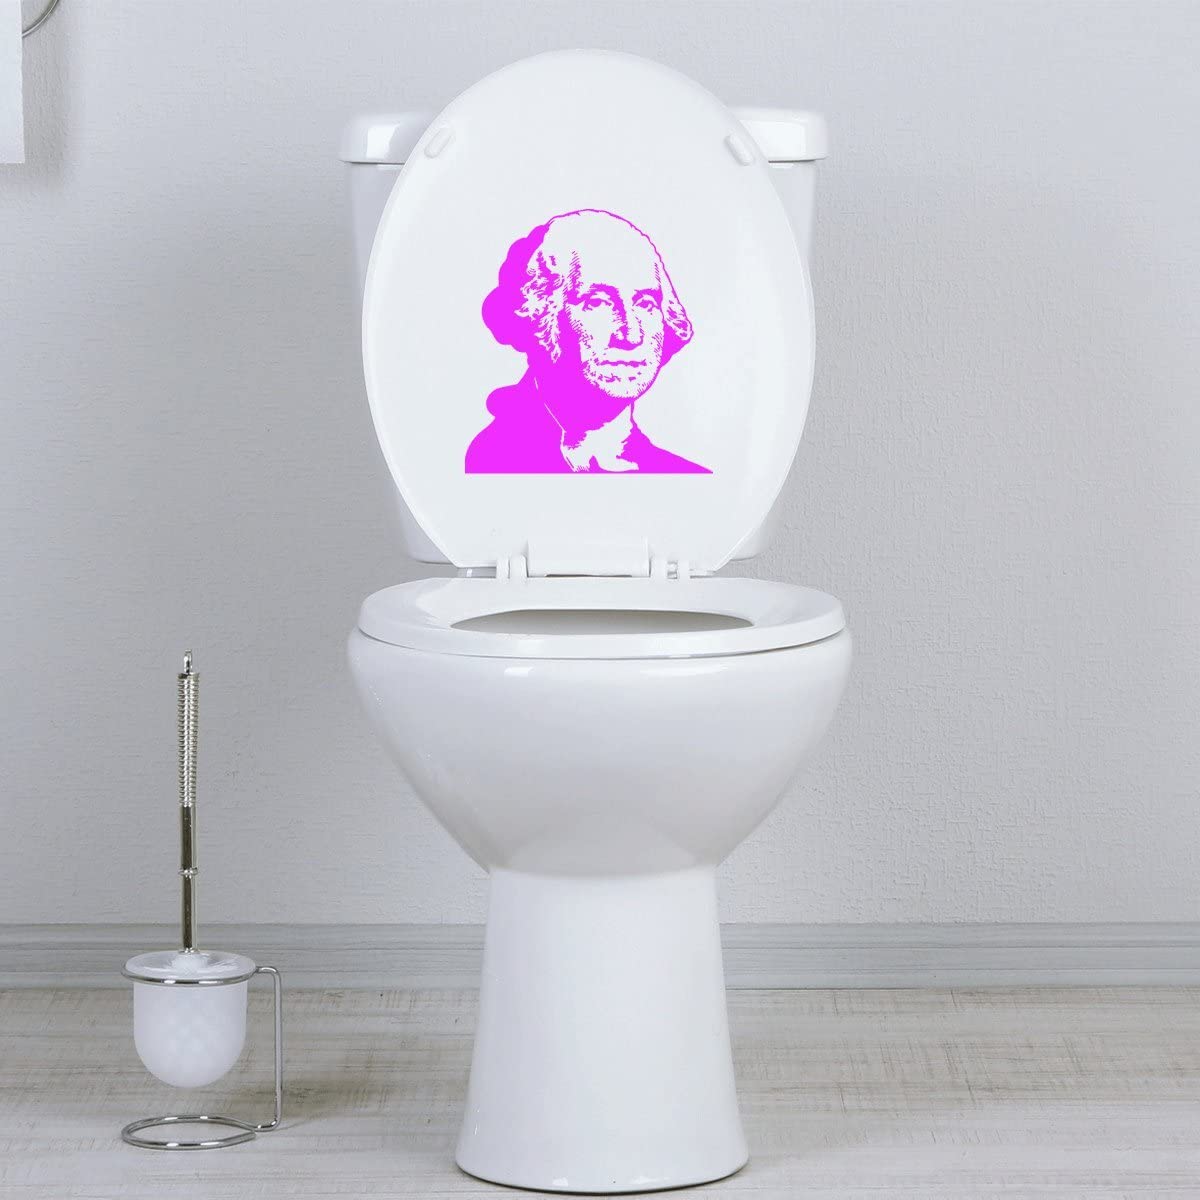 Pooping Routines of Our Early Presidents